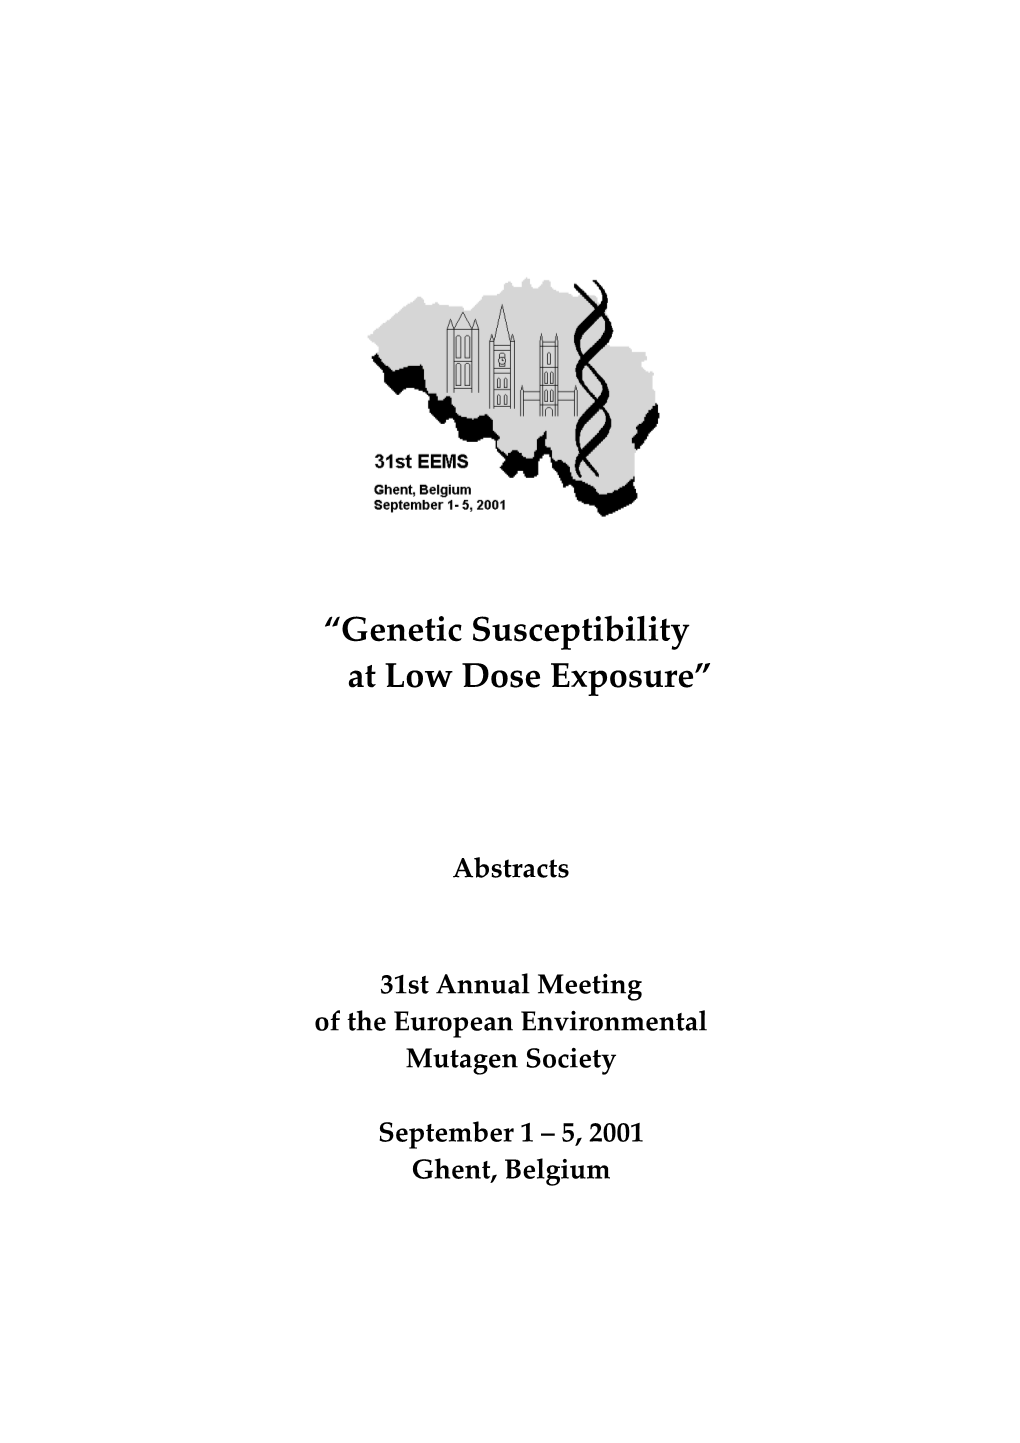 Genetic Susceptibility at Low Dose Exposure